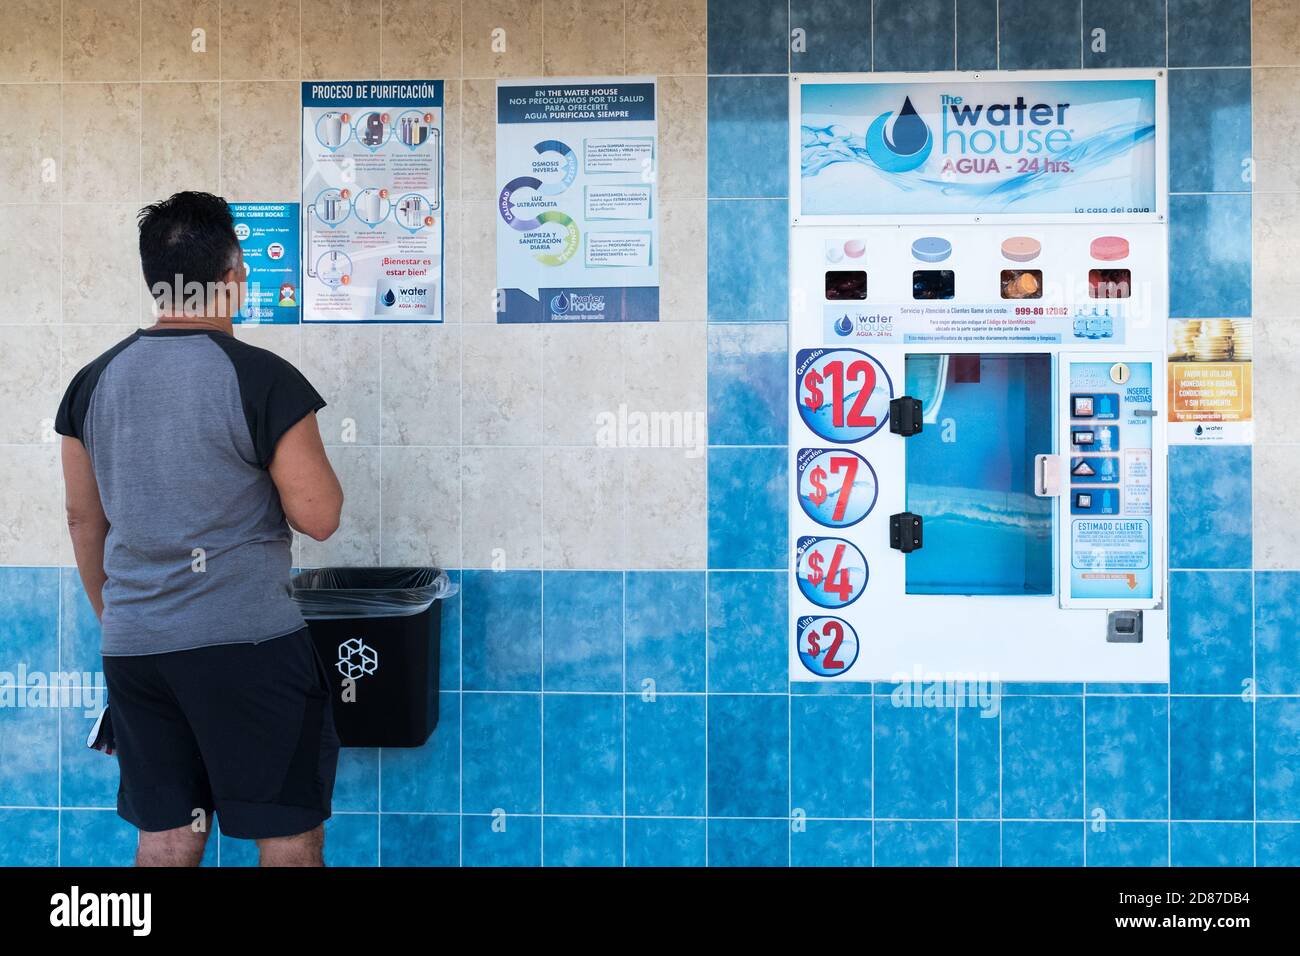 Drinking water sold on the street via a distributing machine, Merida Mexico Stock Photo